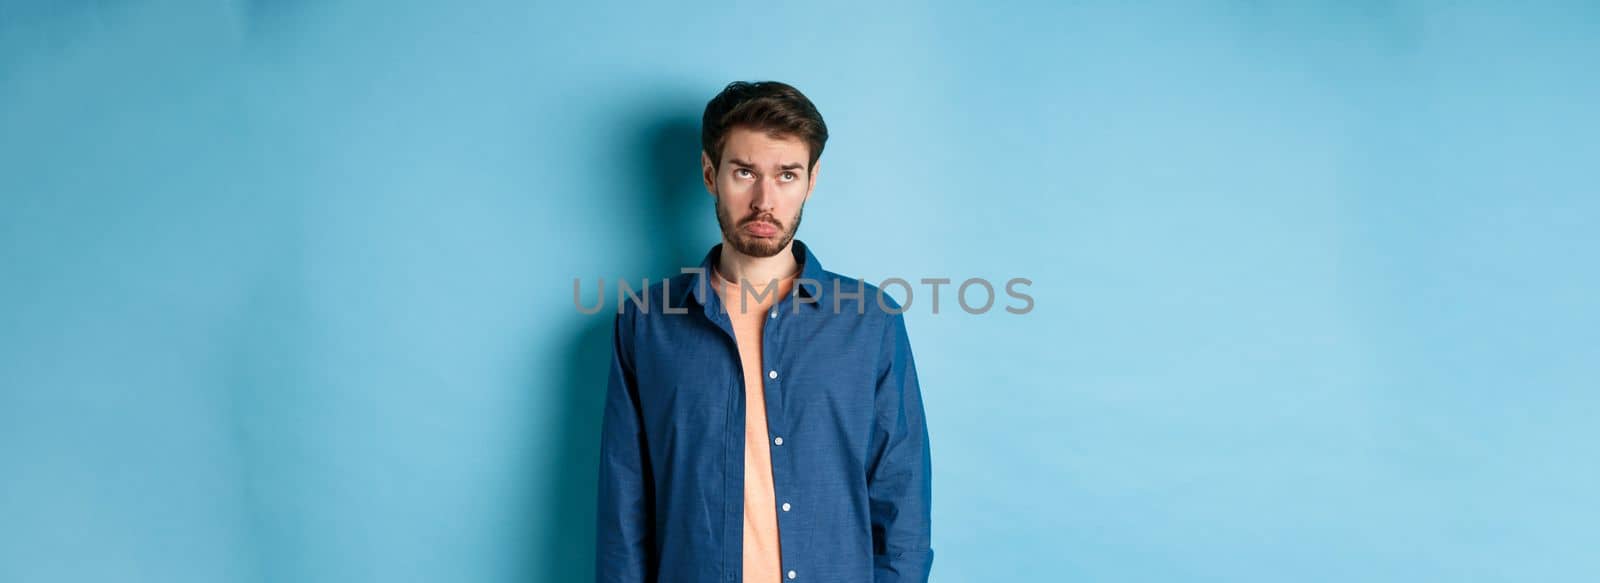 Sad man whining and sulking, looking up with upset face, standing on blue background.